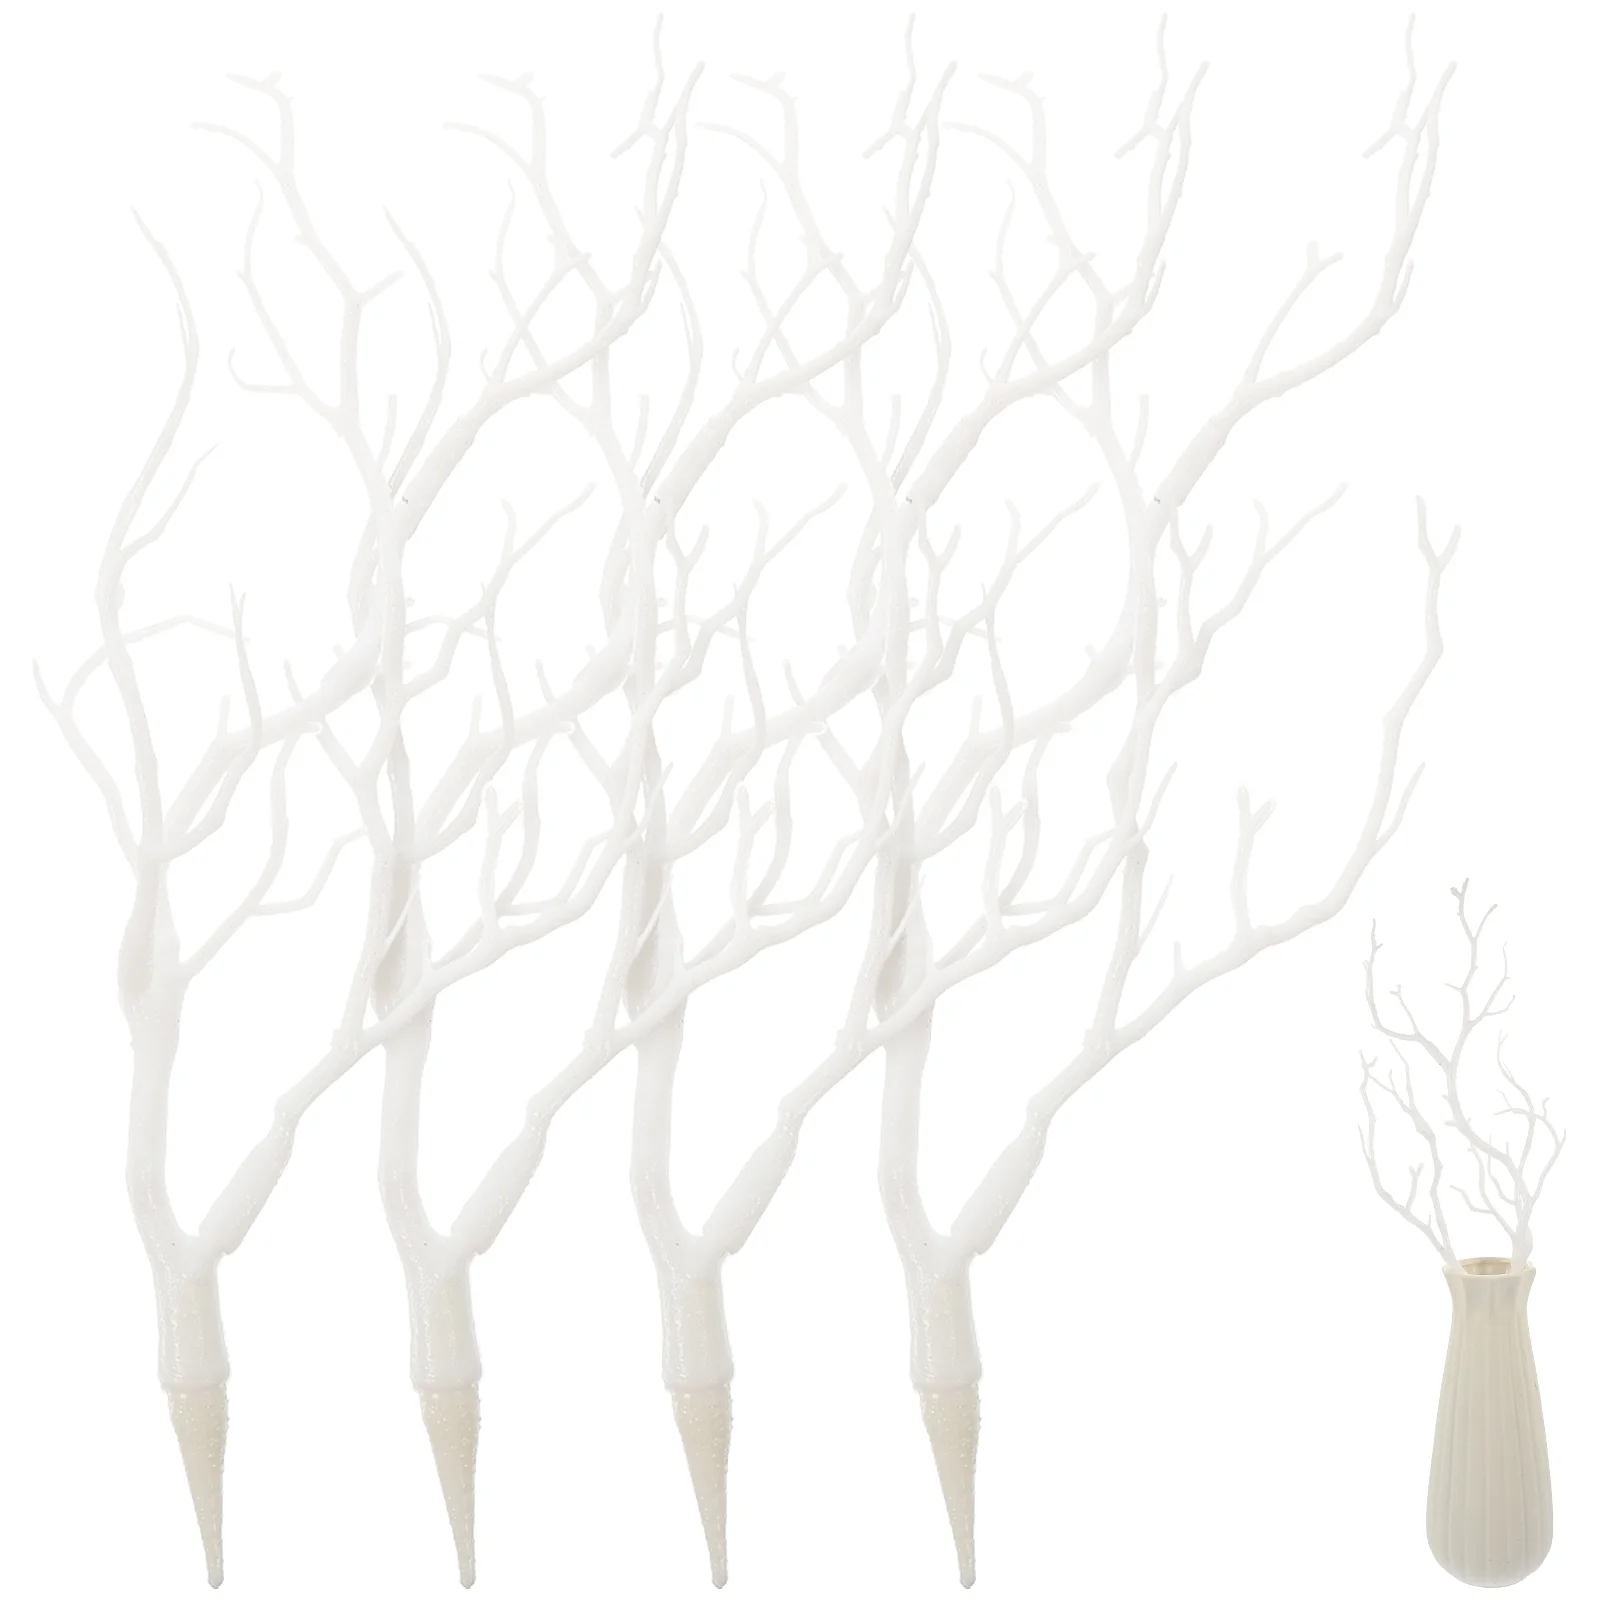 

Branches Tree Artificial Branch Twigs Antler Dry Manzanita Dried Fake White Plastic Stems Christmas Antlers Willow Diy